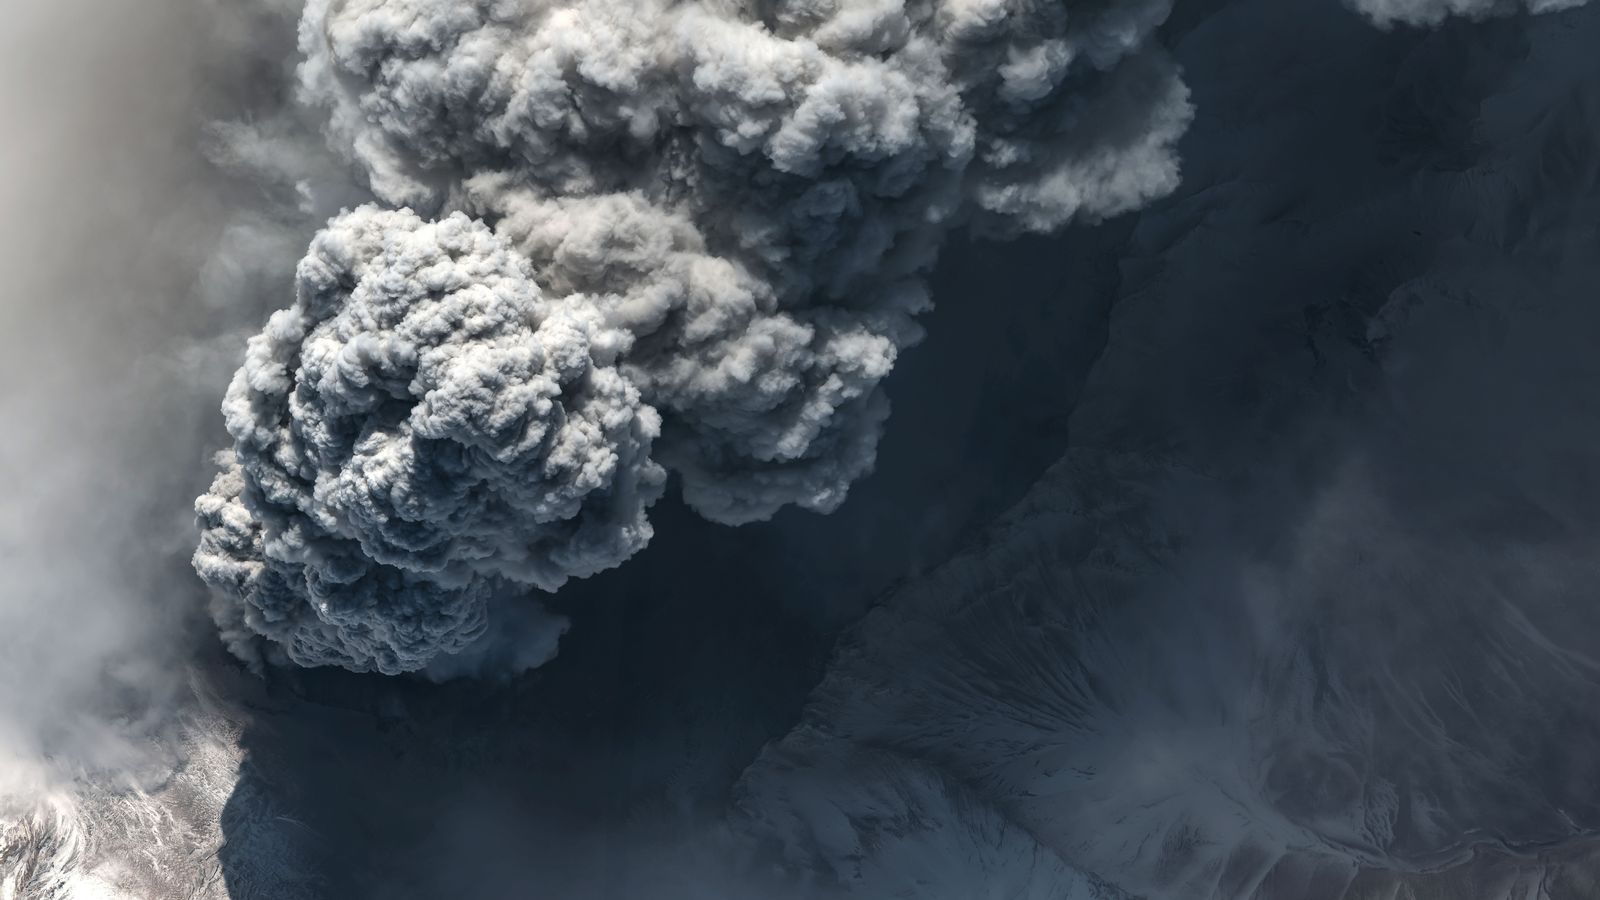 Shiveluch volcano eruption in Russia captured by Maxar Technologies